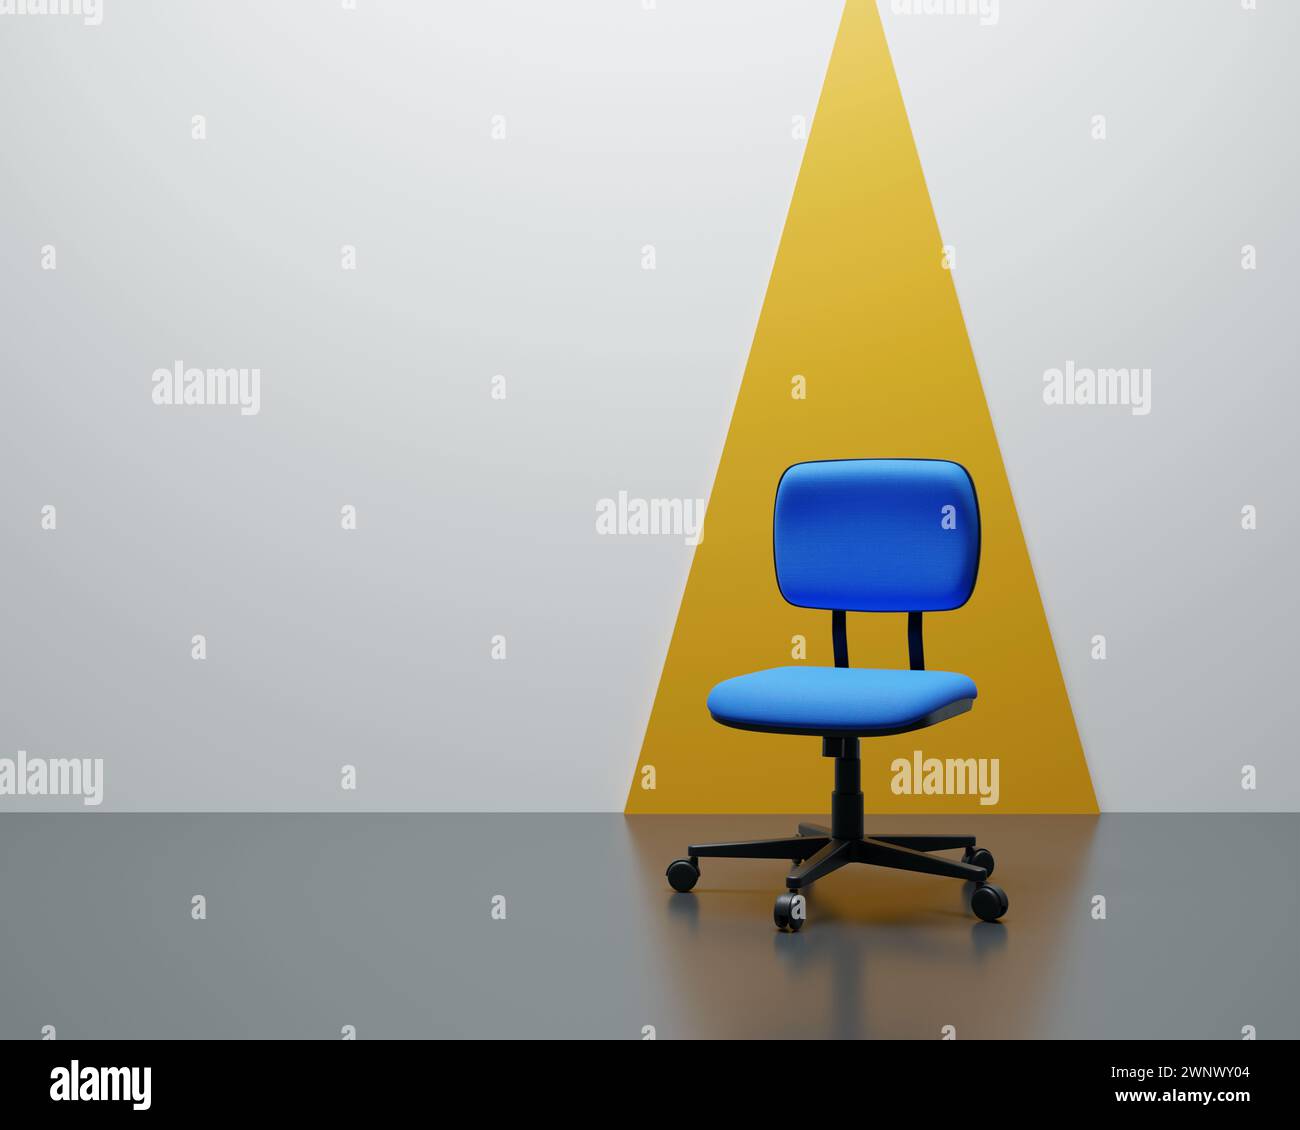 We are hiring collage concept. Chairs in modern design. Free photo hiring concept with empty chair. chairs with one odd one out job opportunity. Stock Photo